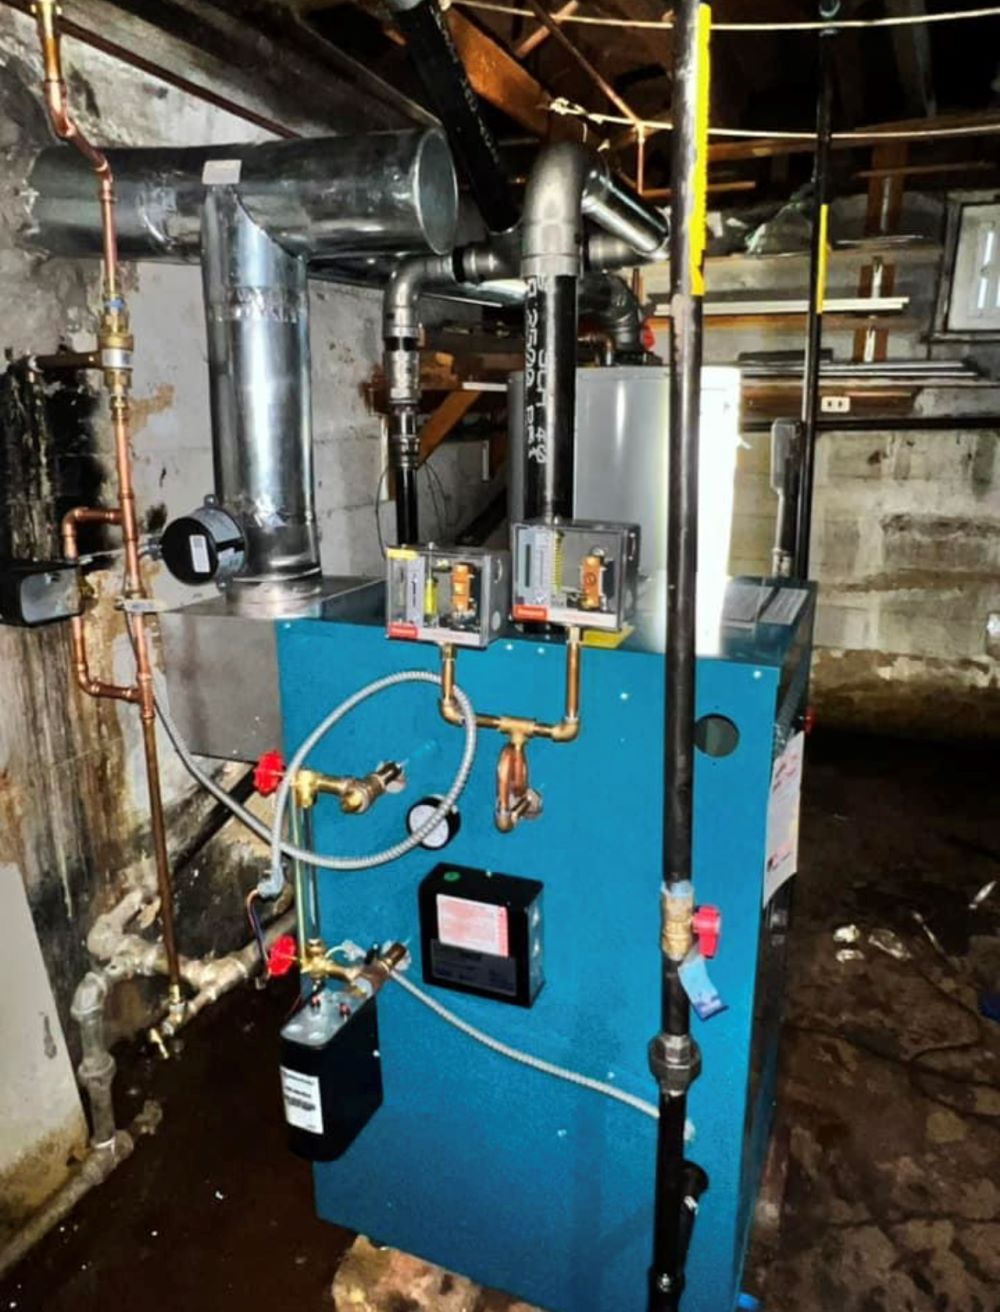 new-oil-to-gas-conversion-all-done-by-mjf-mechanical